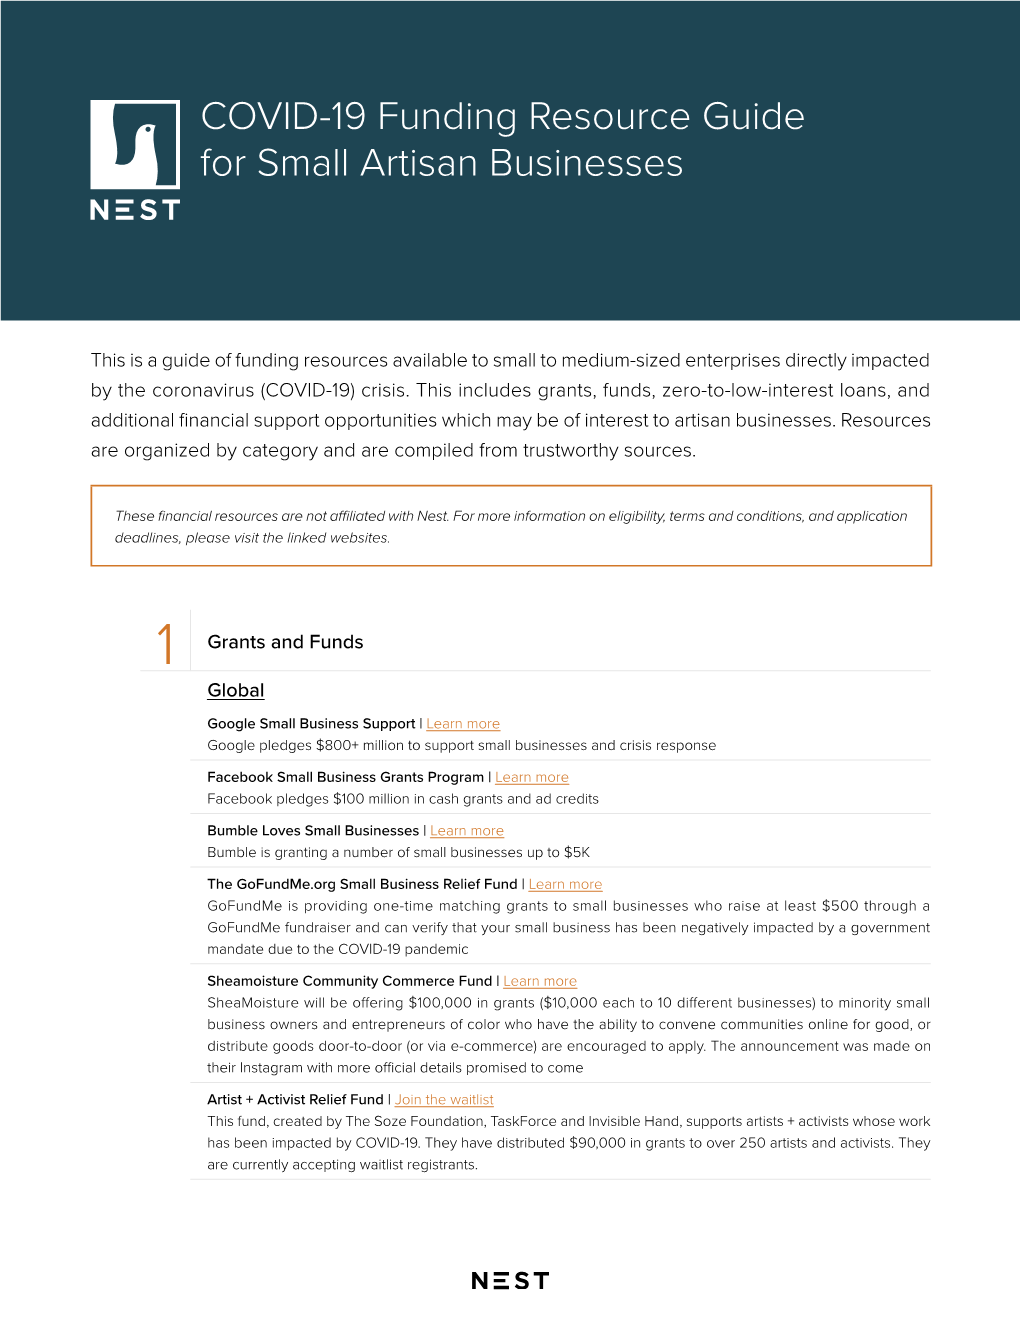 COVID-19 Funding Resource Guide for Small Artisan Businesses